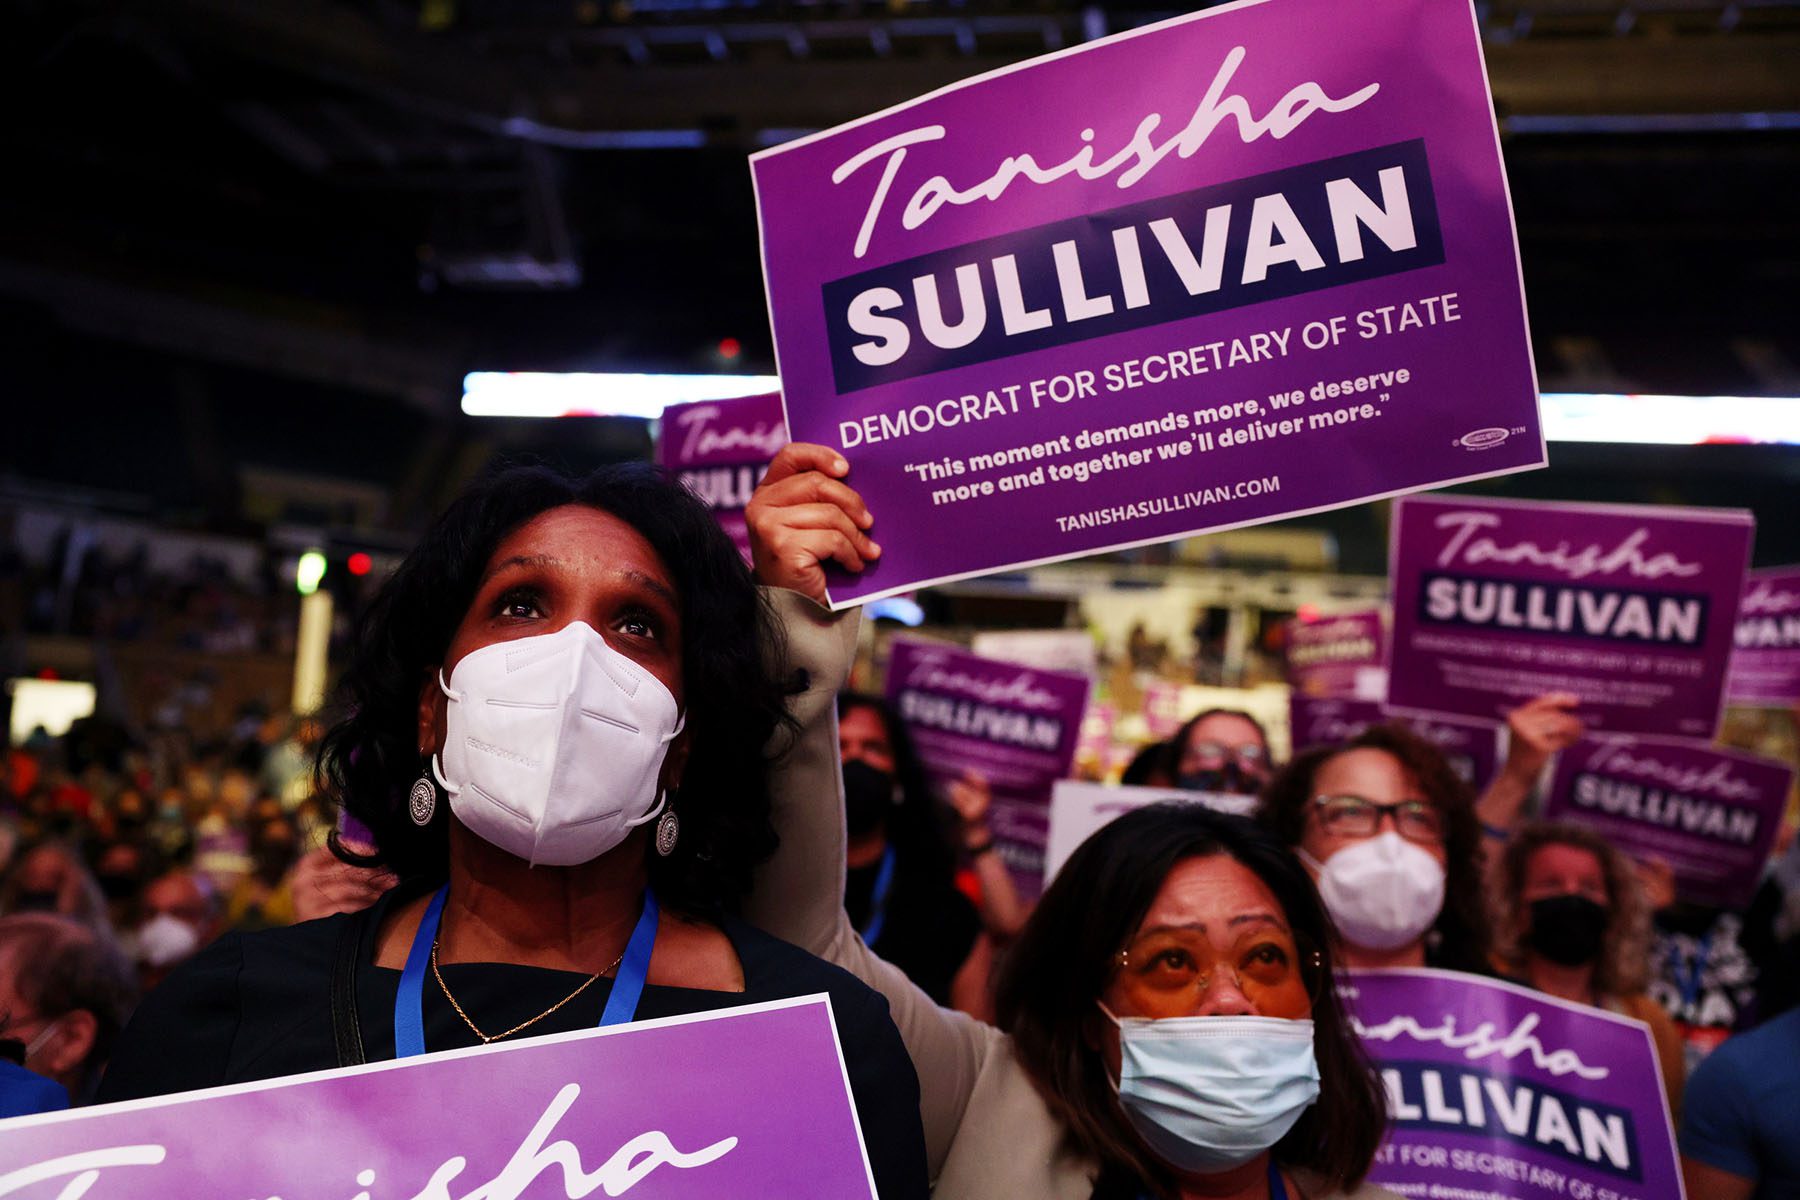 People holding signs in support of Tanisha Sullivan listen to her speak at the State Democratic Party Convention.